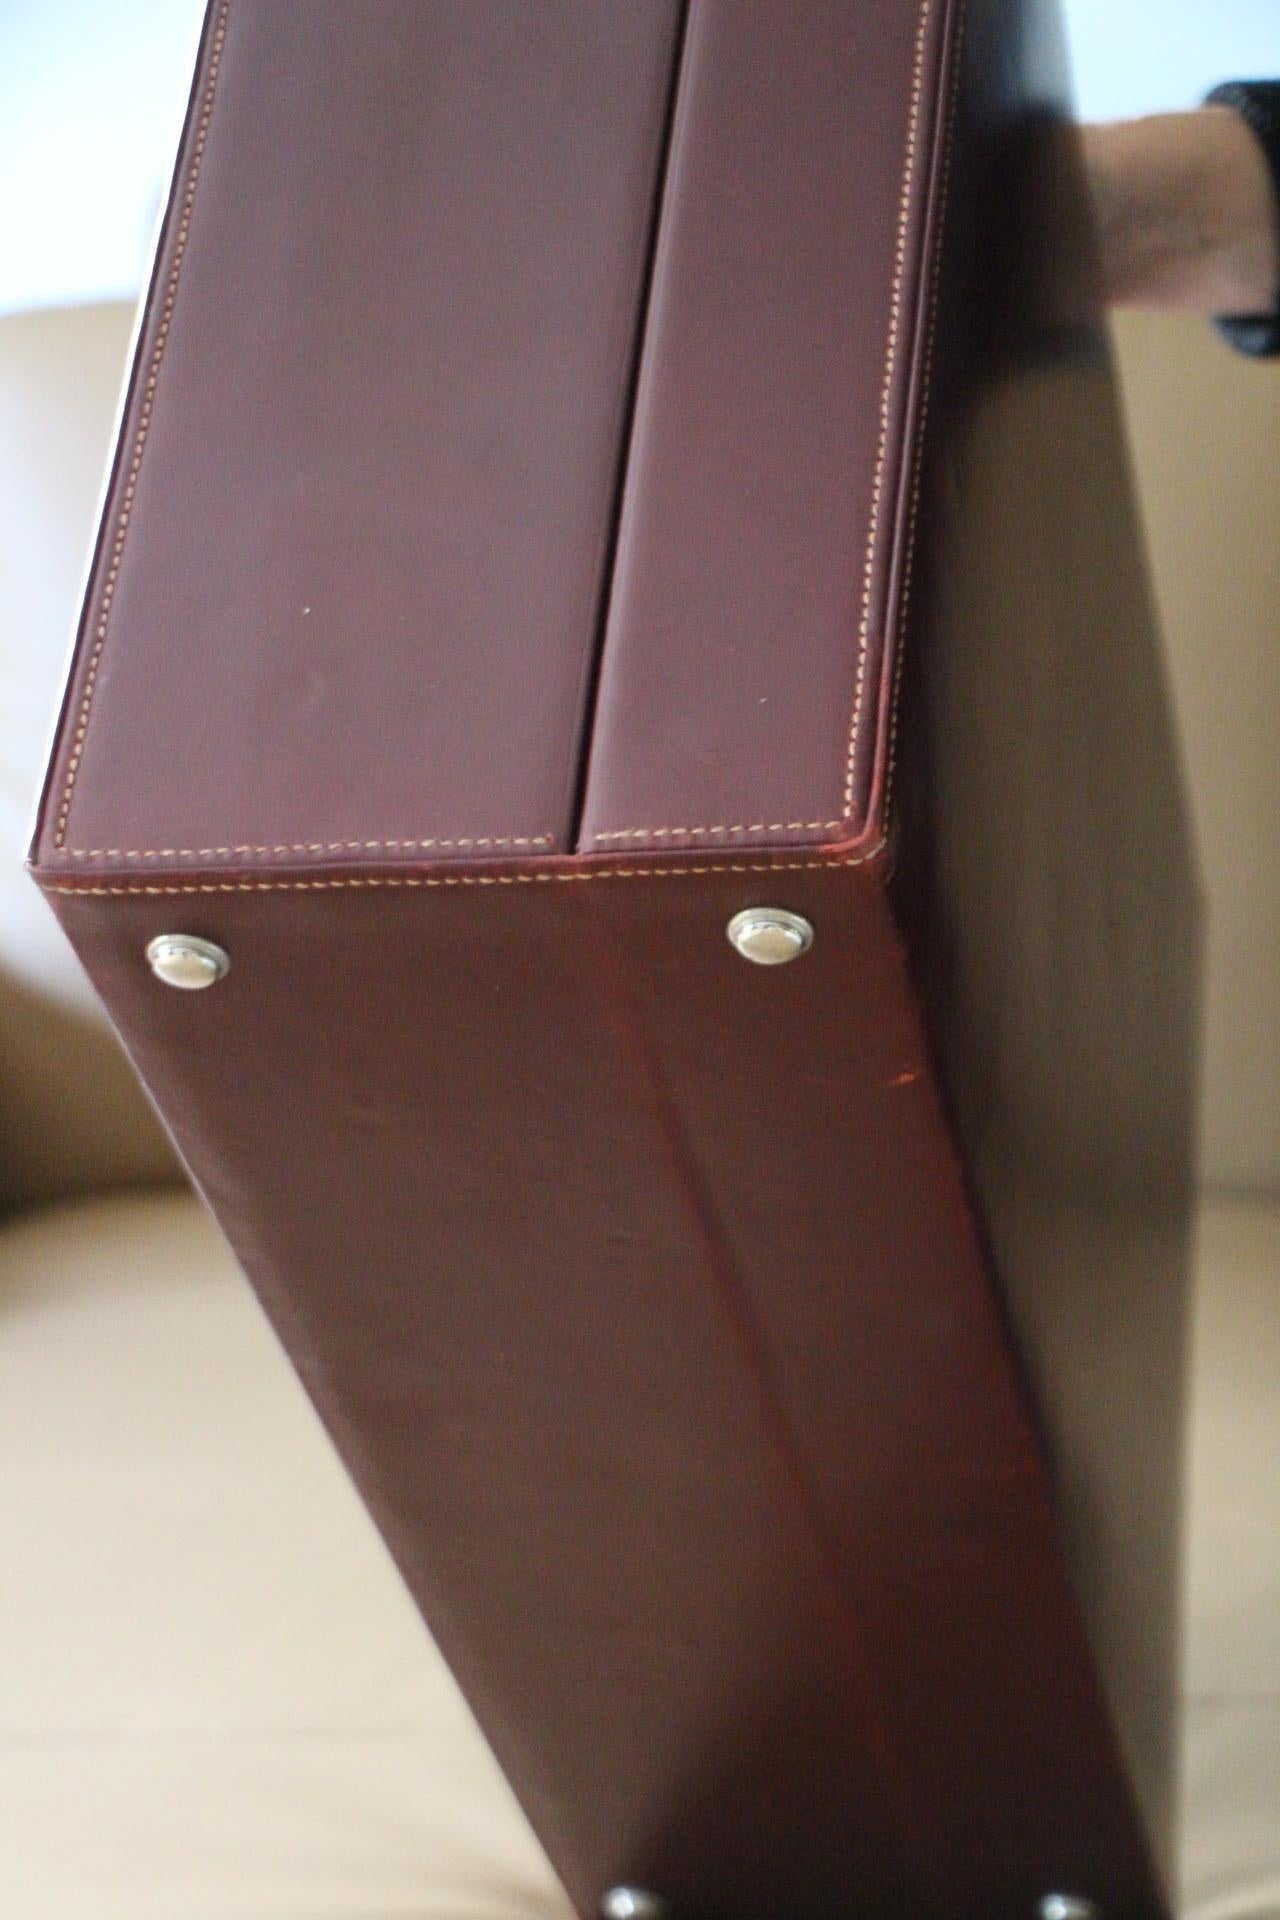 Red Leather Hermes Suitcase 53 cm, Hermes Trunk, Hermes Luggage 9